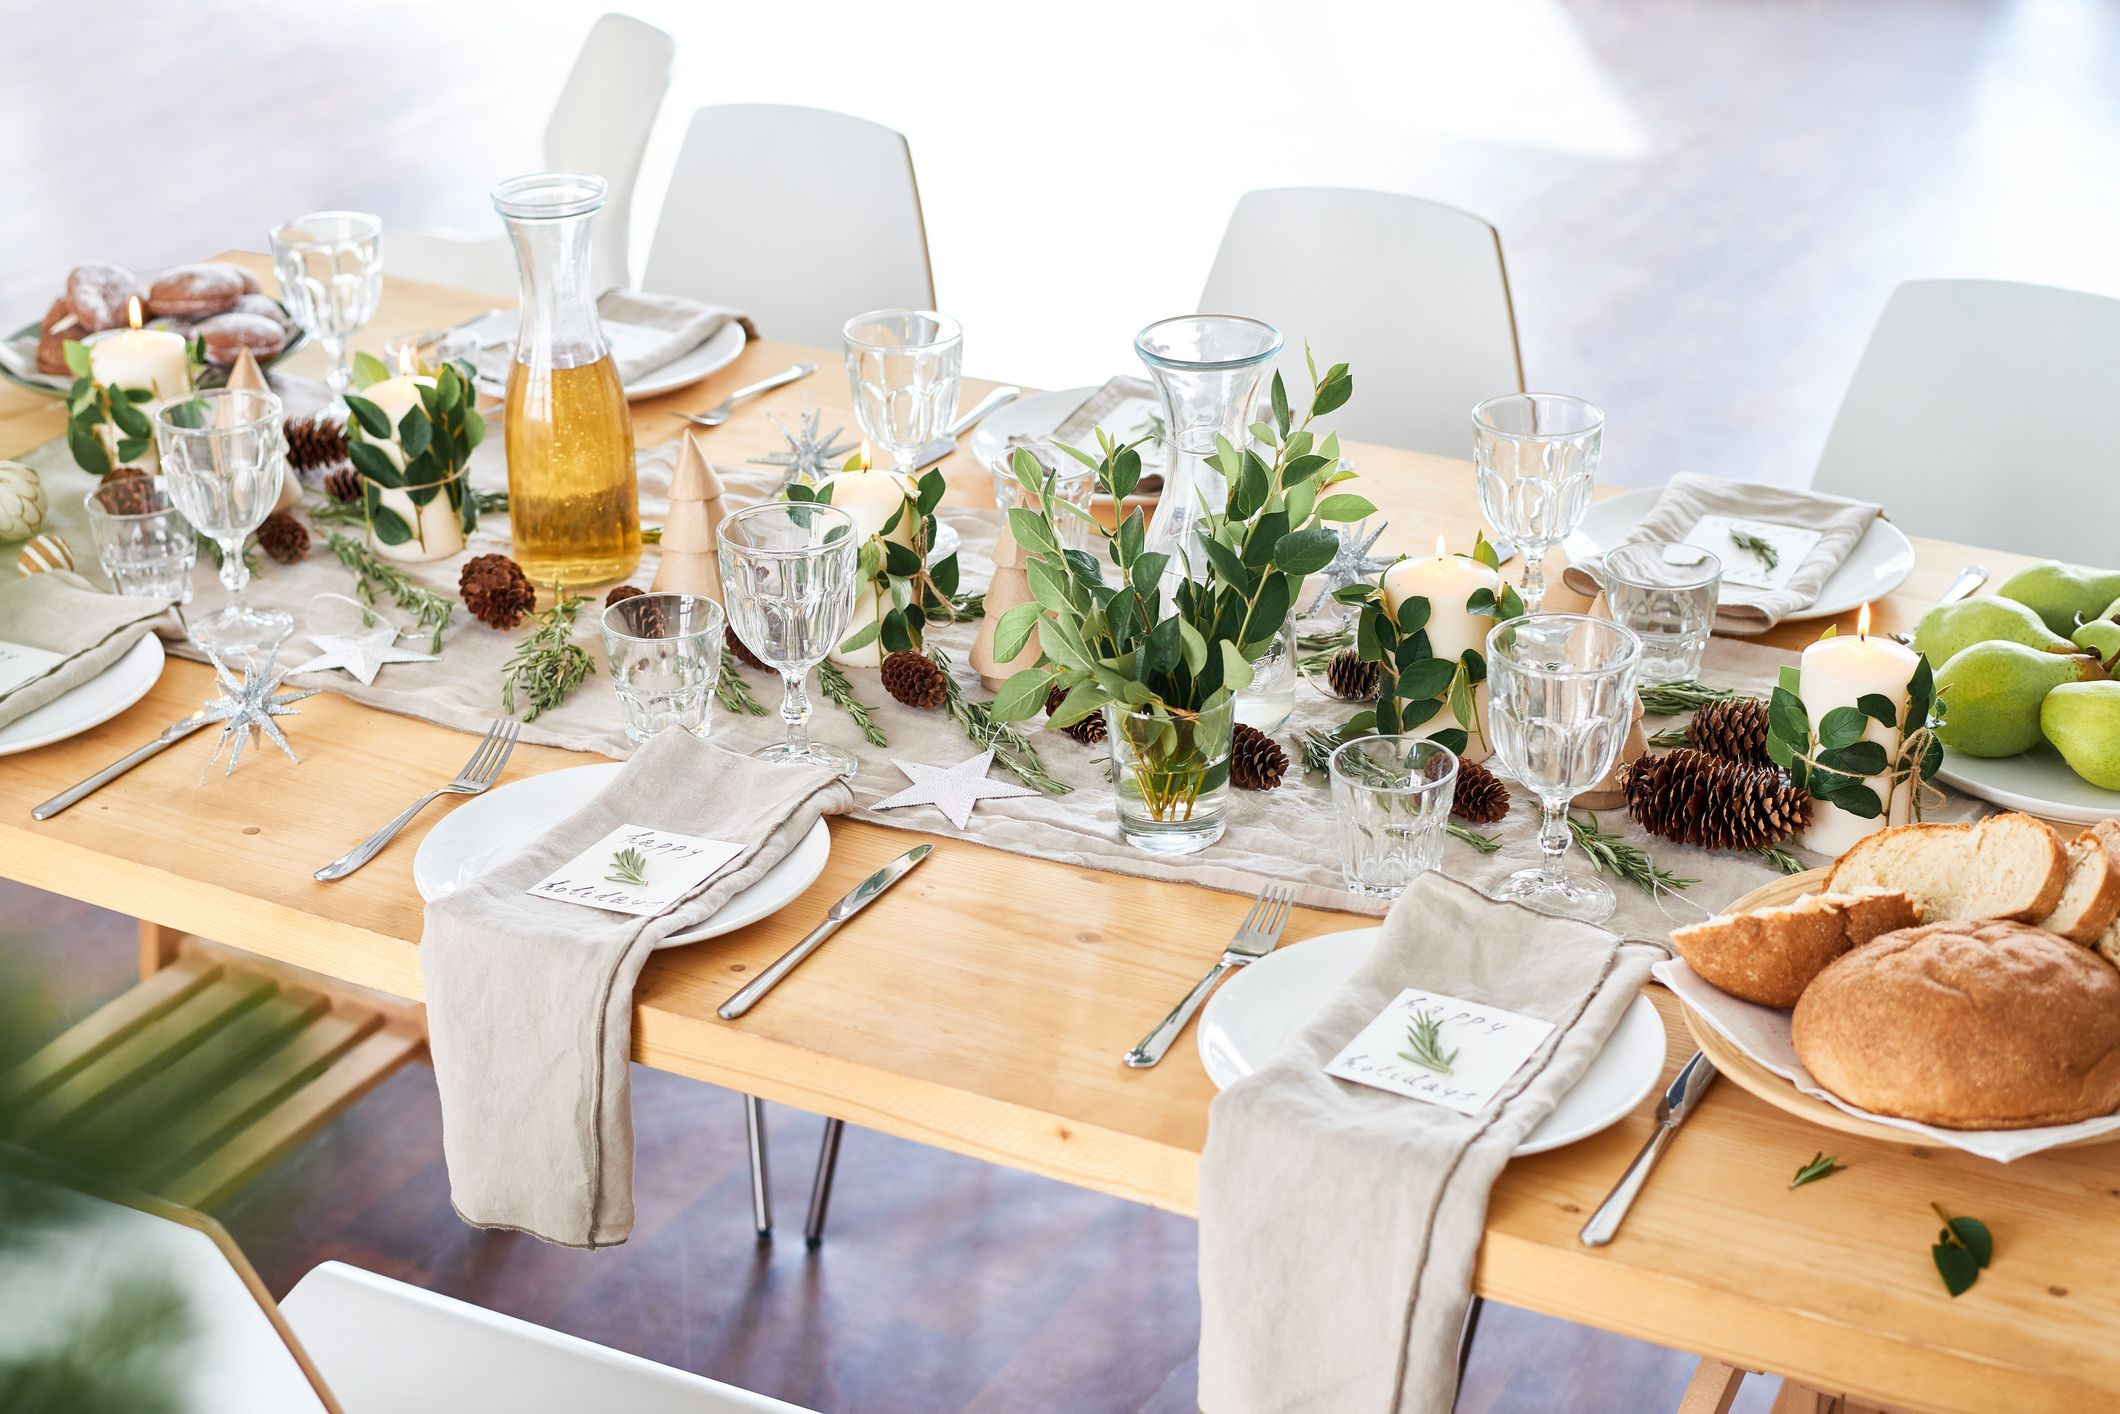 Formal Dinner Party Ideas
 Proper Way to Set a Formal Dinner Table